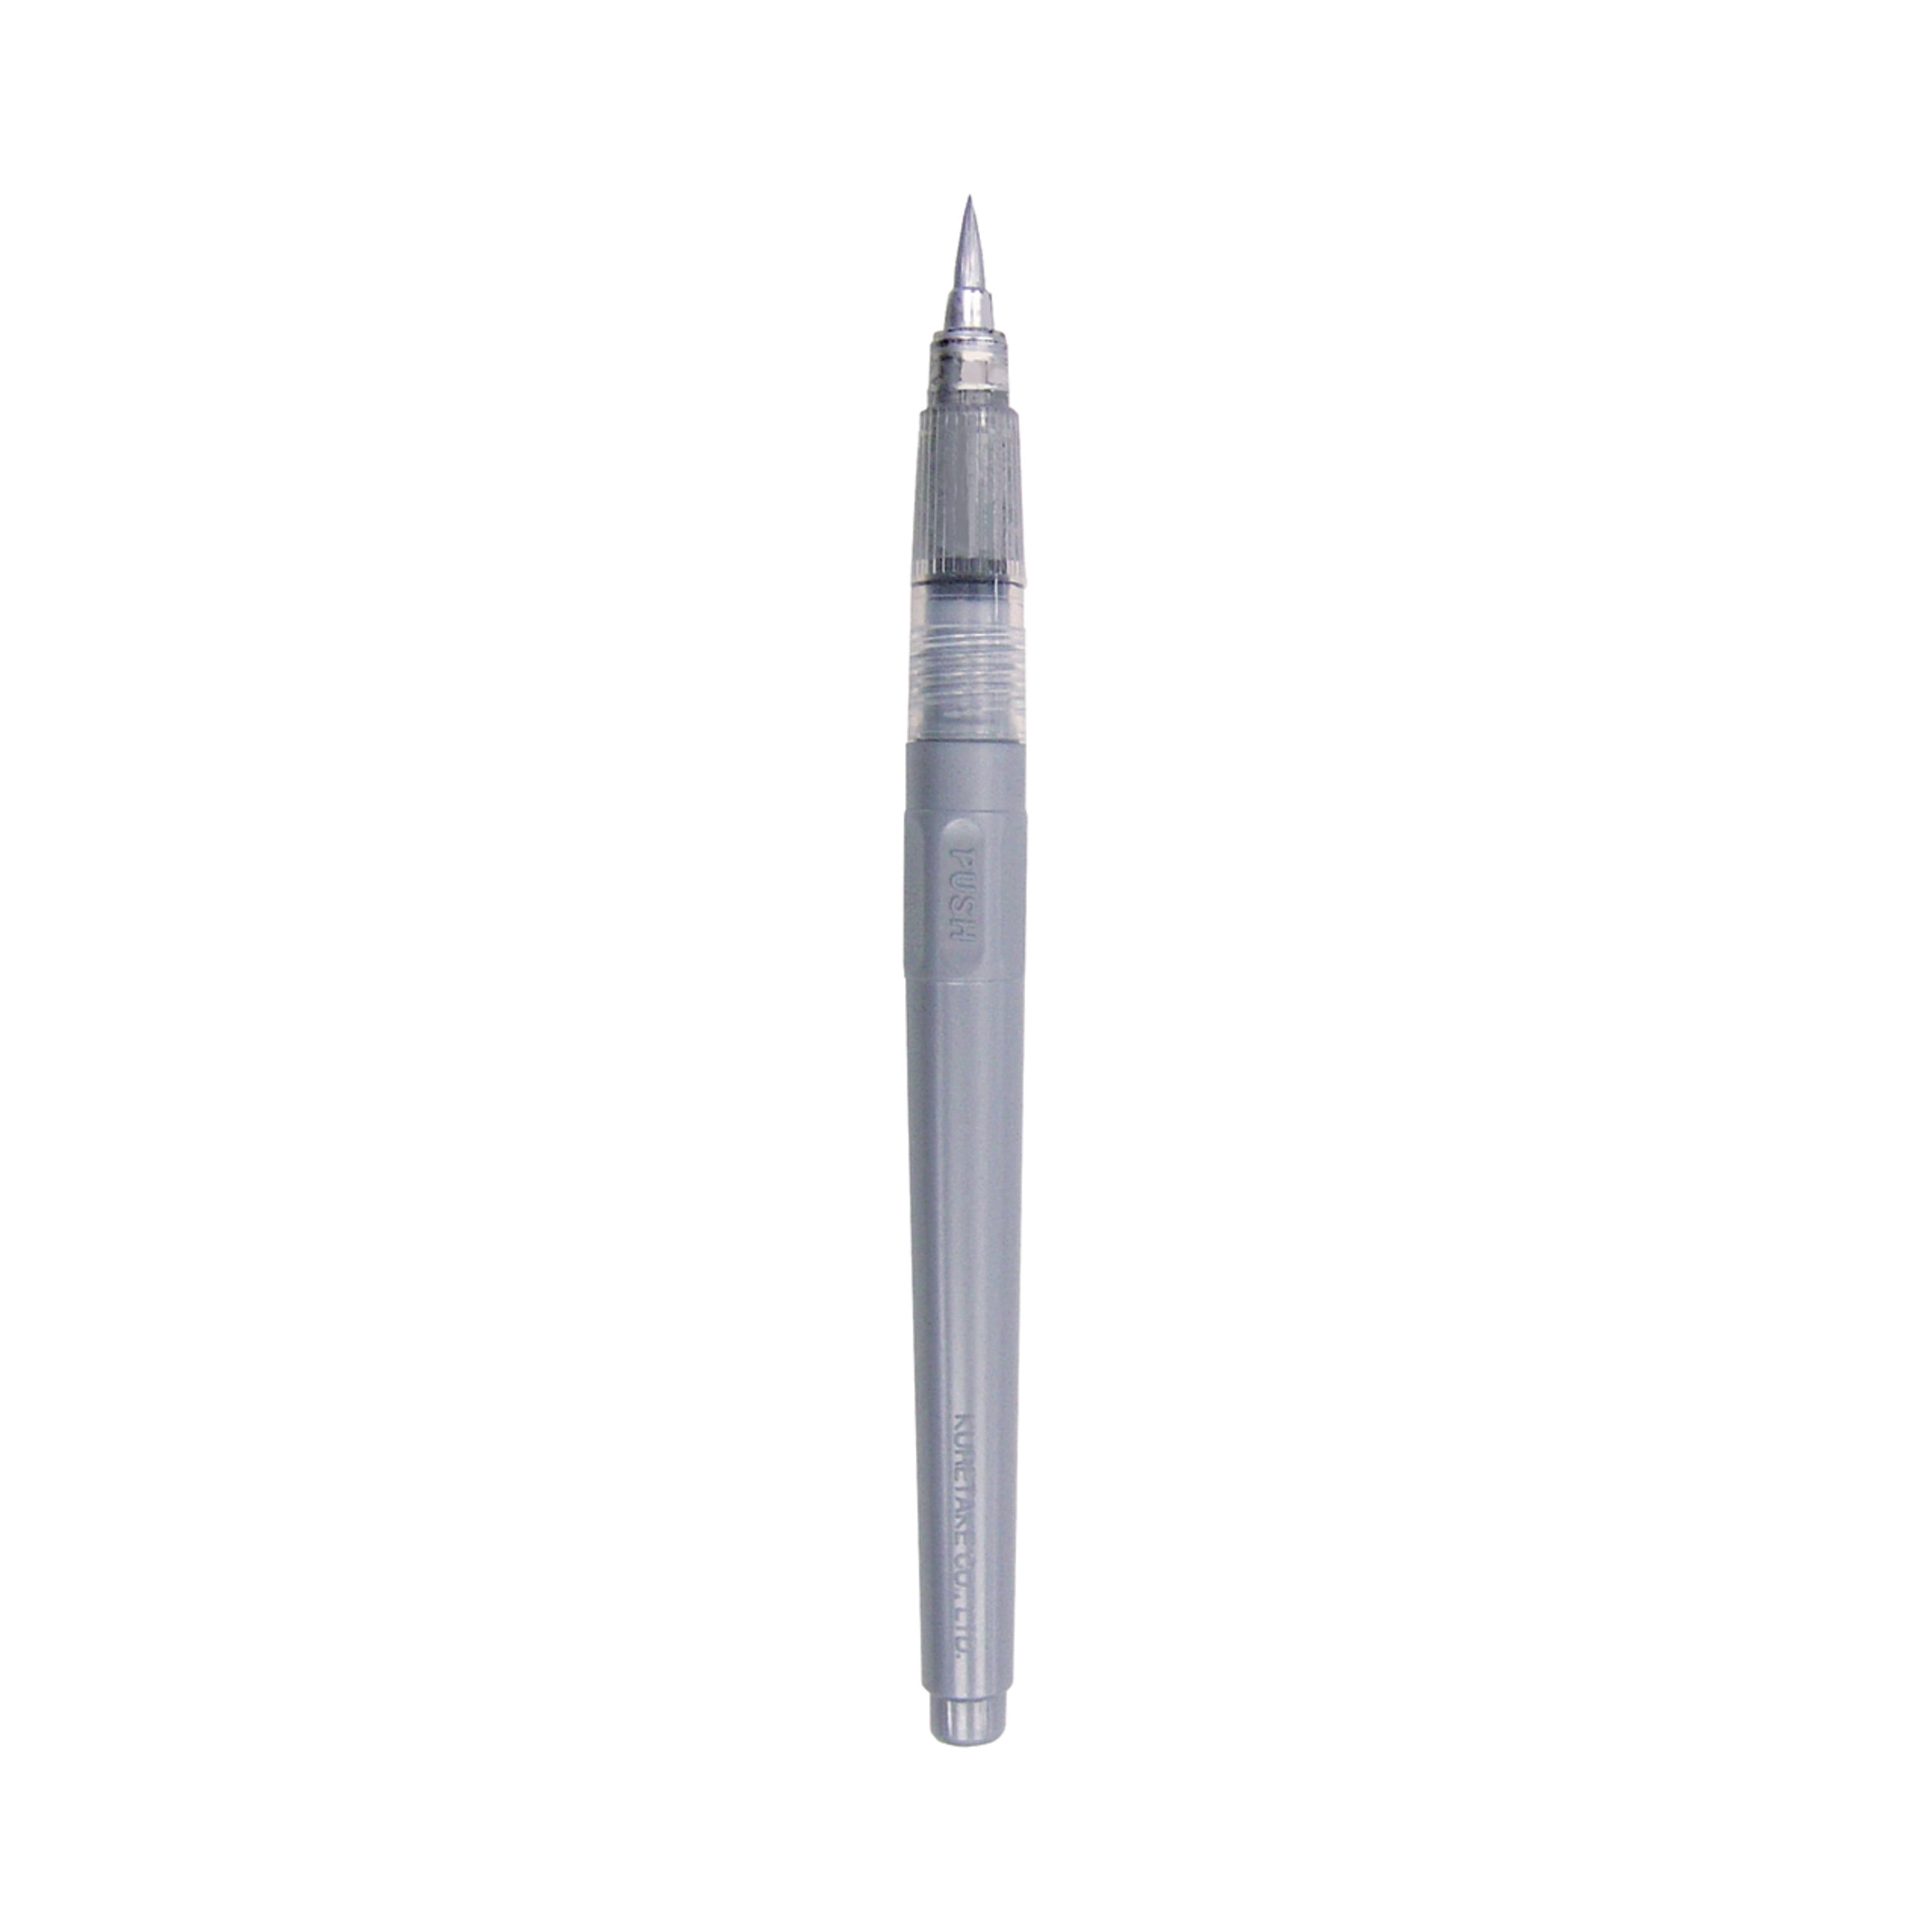 SagaSave Water Erasable Pen Soluble Marking Pen Disappearing Ink Marking  Pen Fabric Marker for Cloth Sewing 